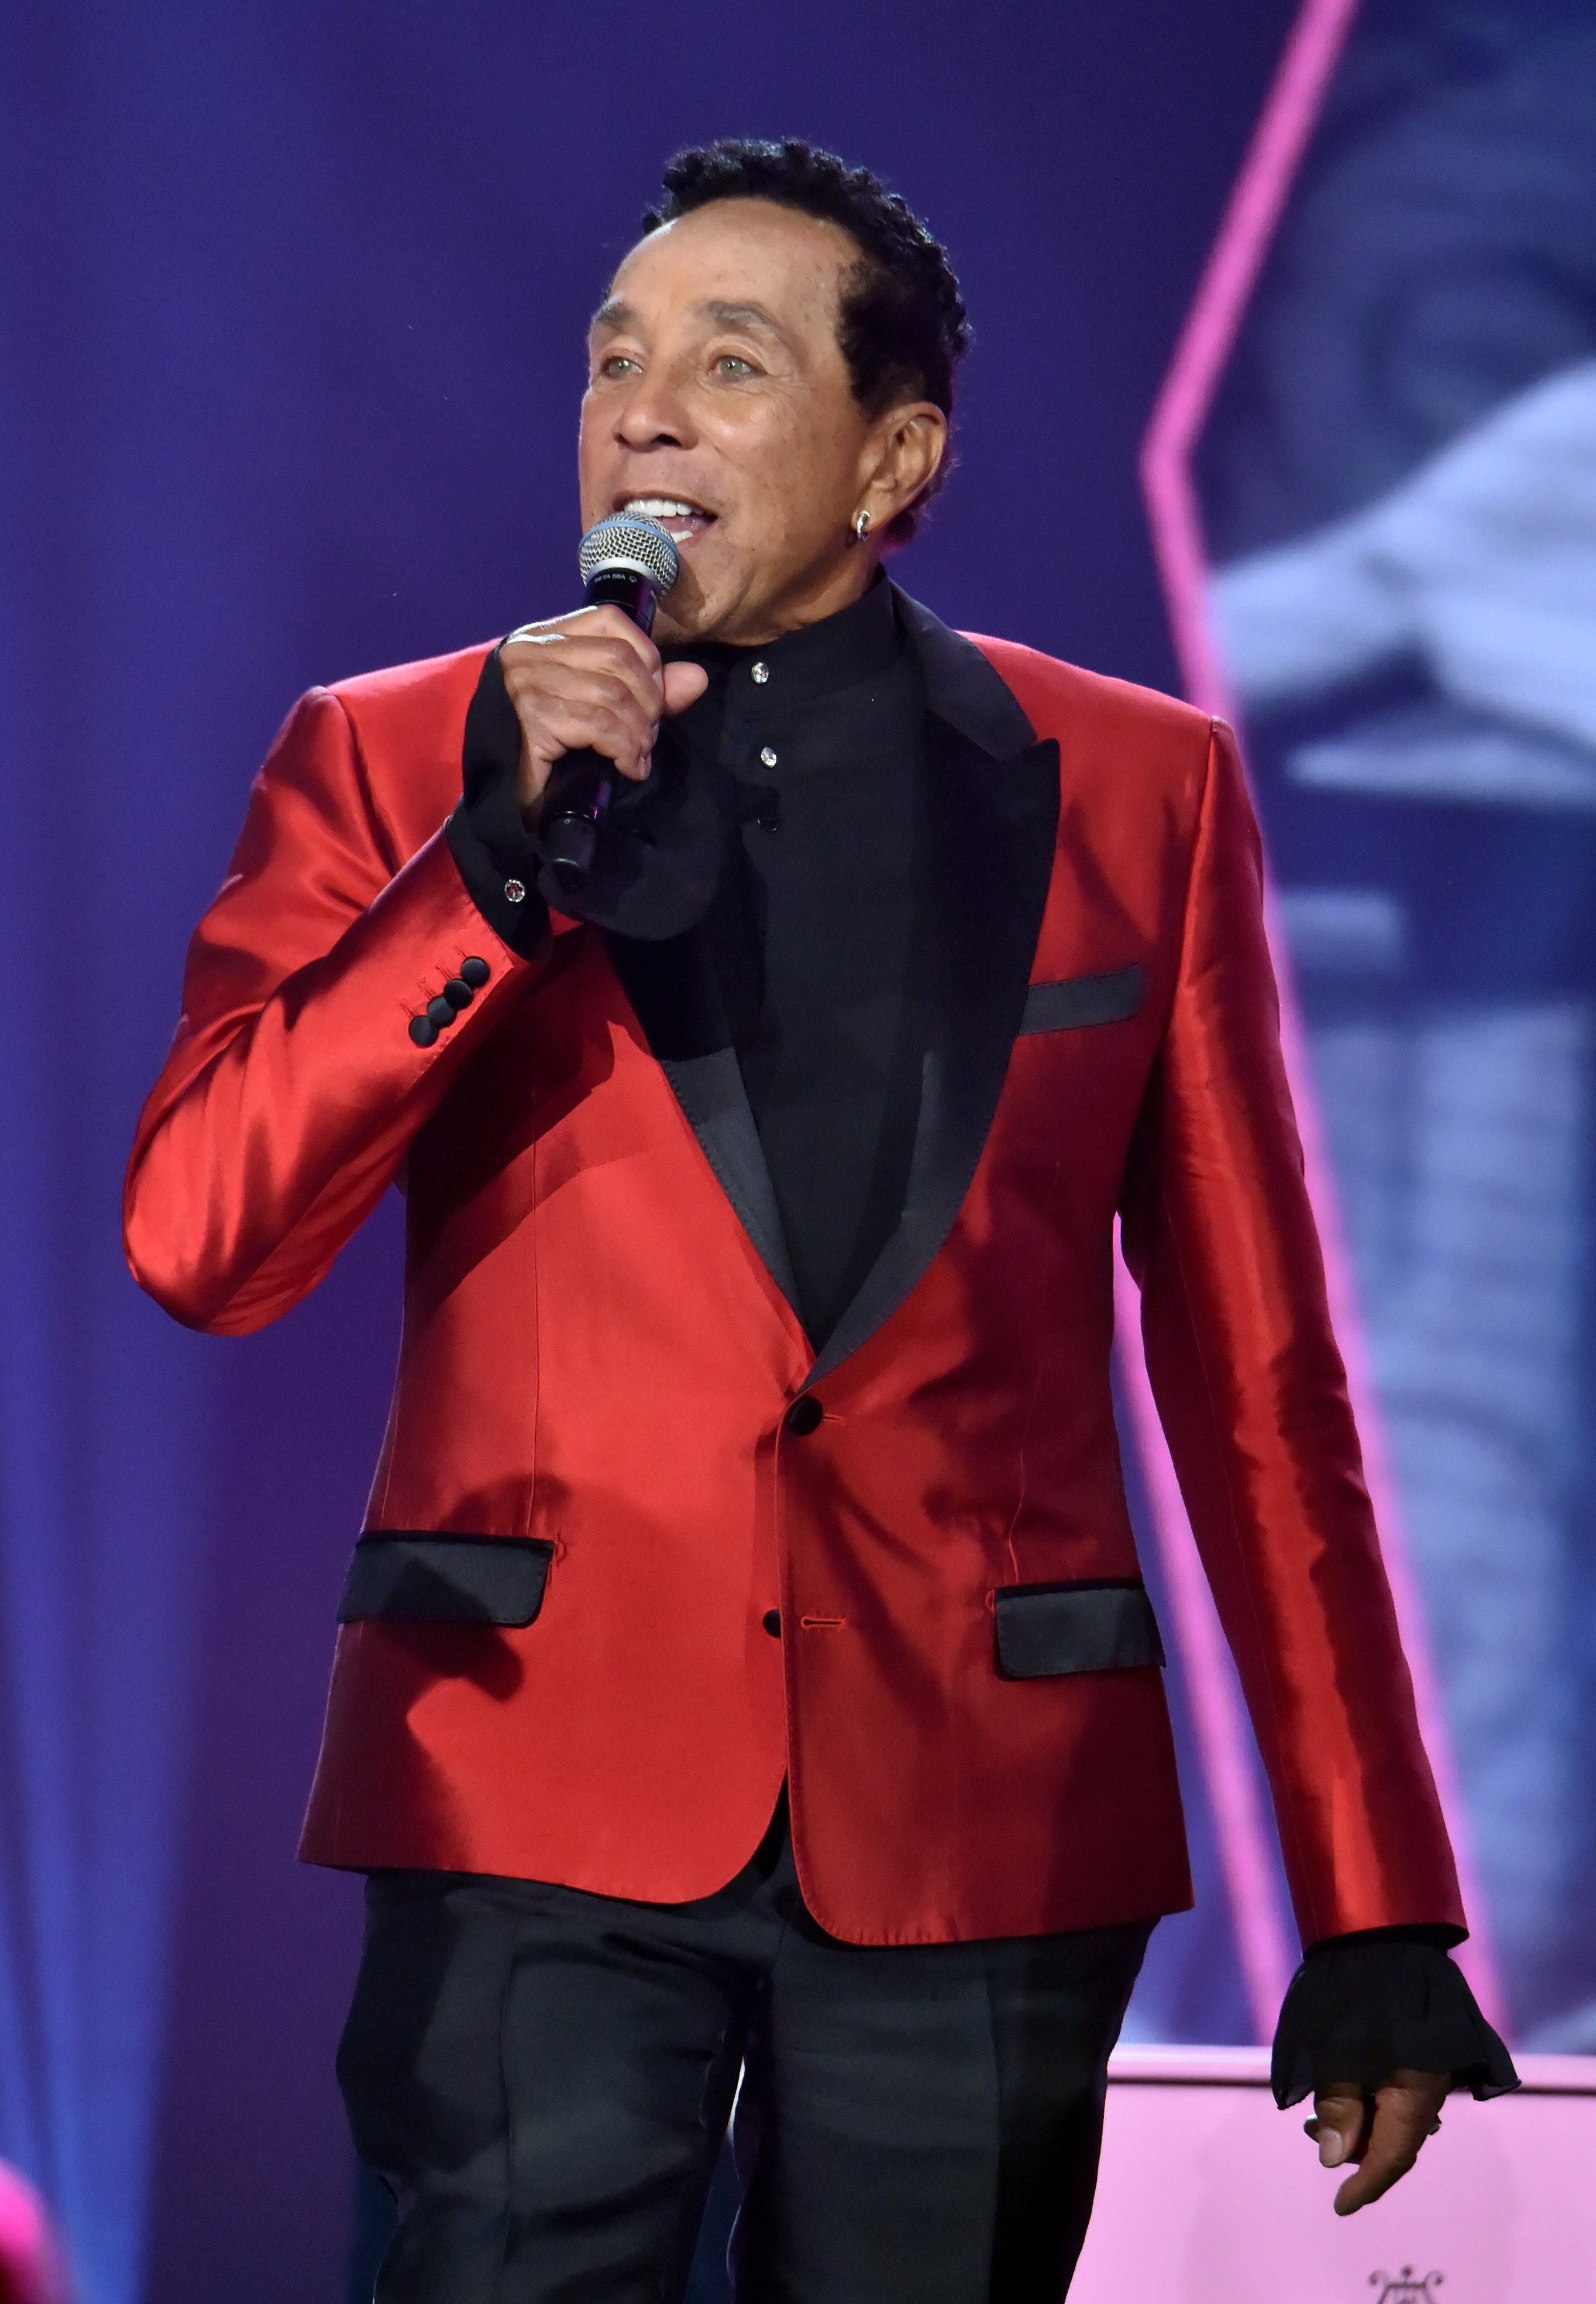 Smokey Robinson performs onstage during the 61st Annual GRAMMY Awards at Staples Center on February 10, 2019 in Los Angeles, California | Photo: GettyImages